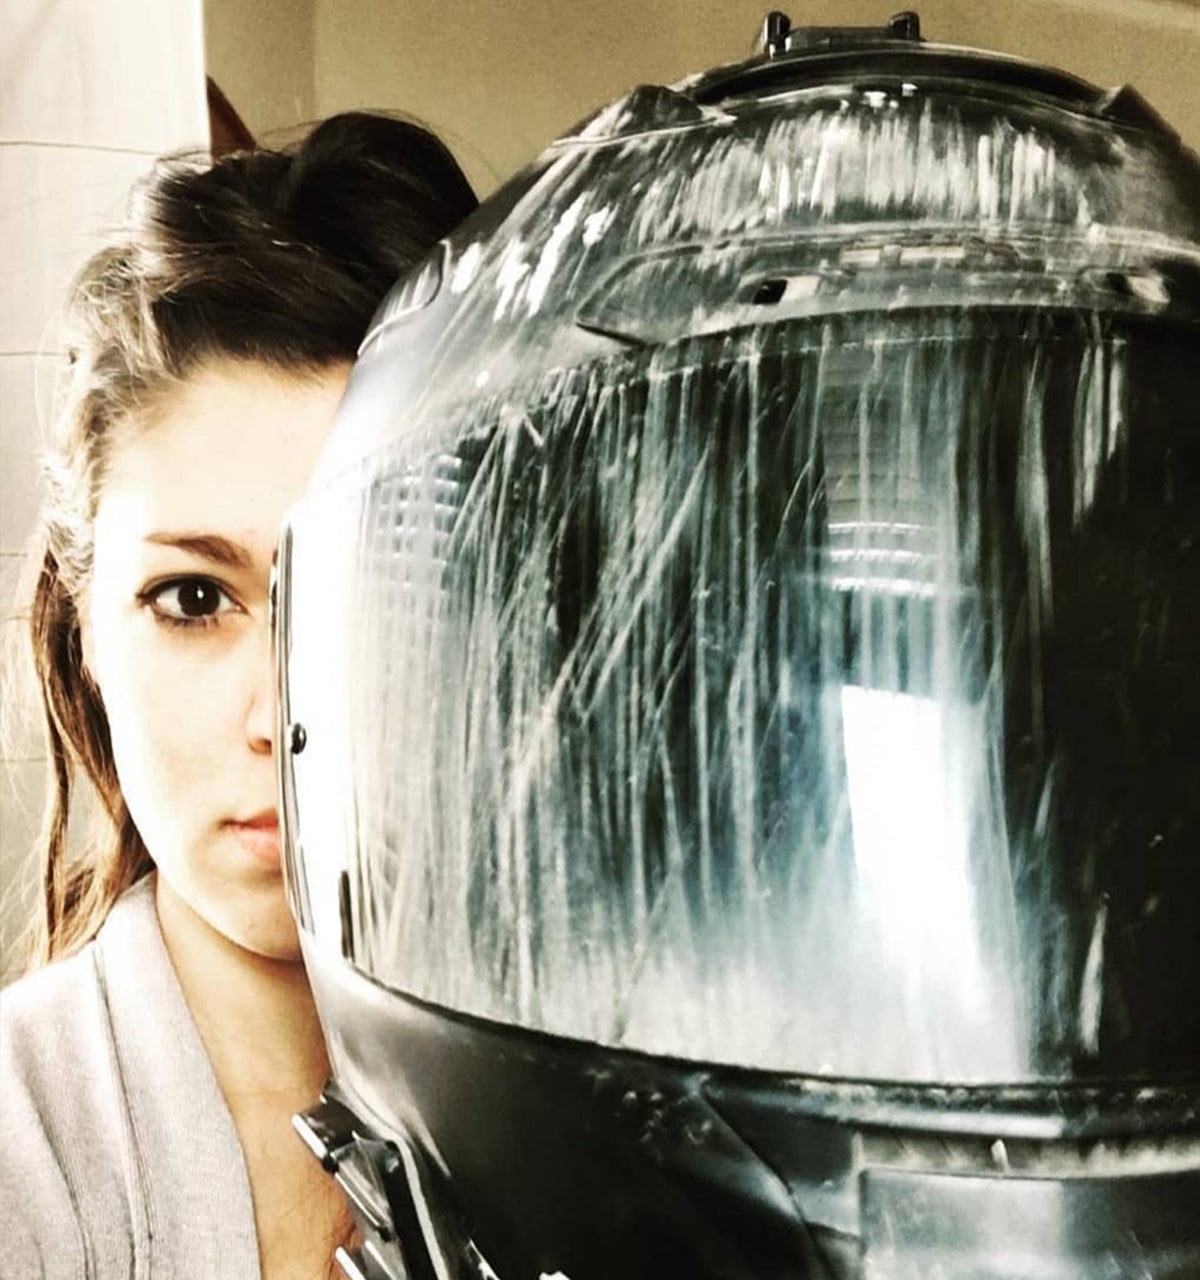 the damage to Liz's helmet after being in a motorcycle accident - moto femmes